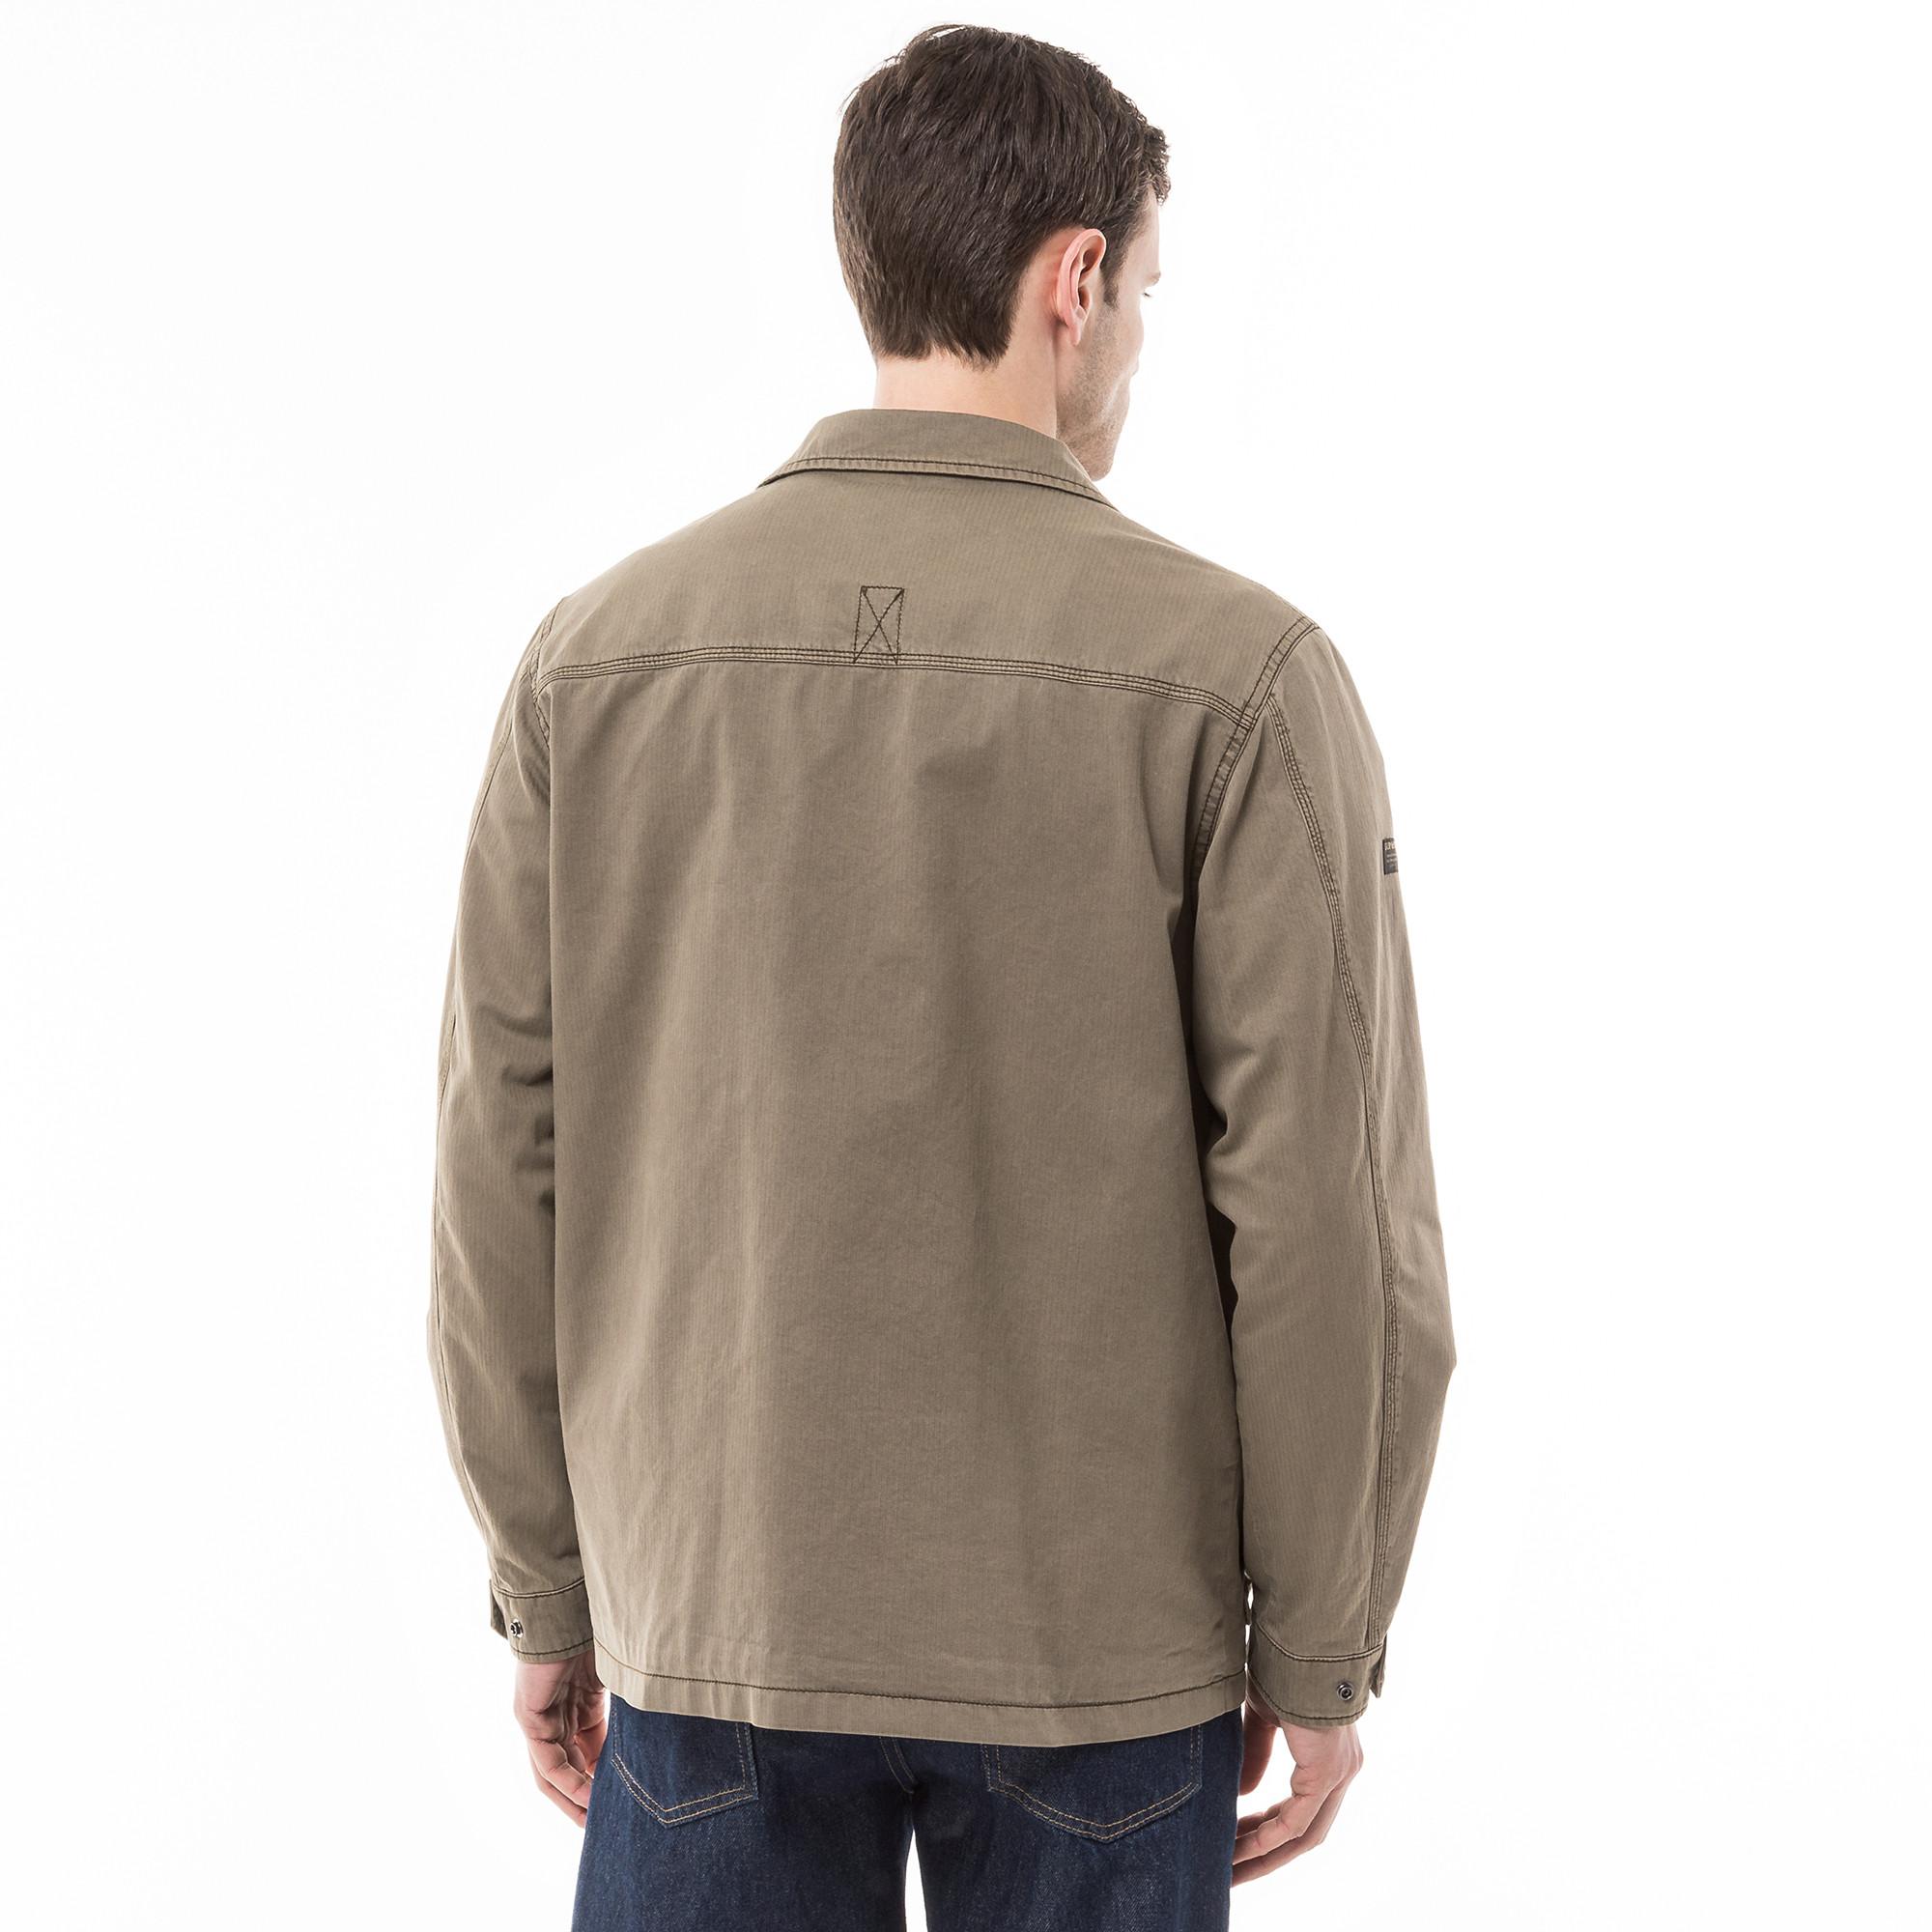 Superdry MILITARY M65 LW JACKET Giacca 